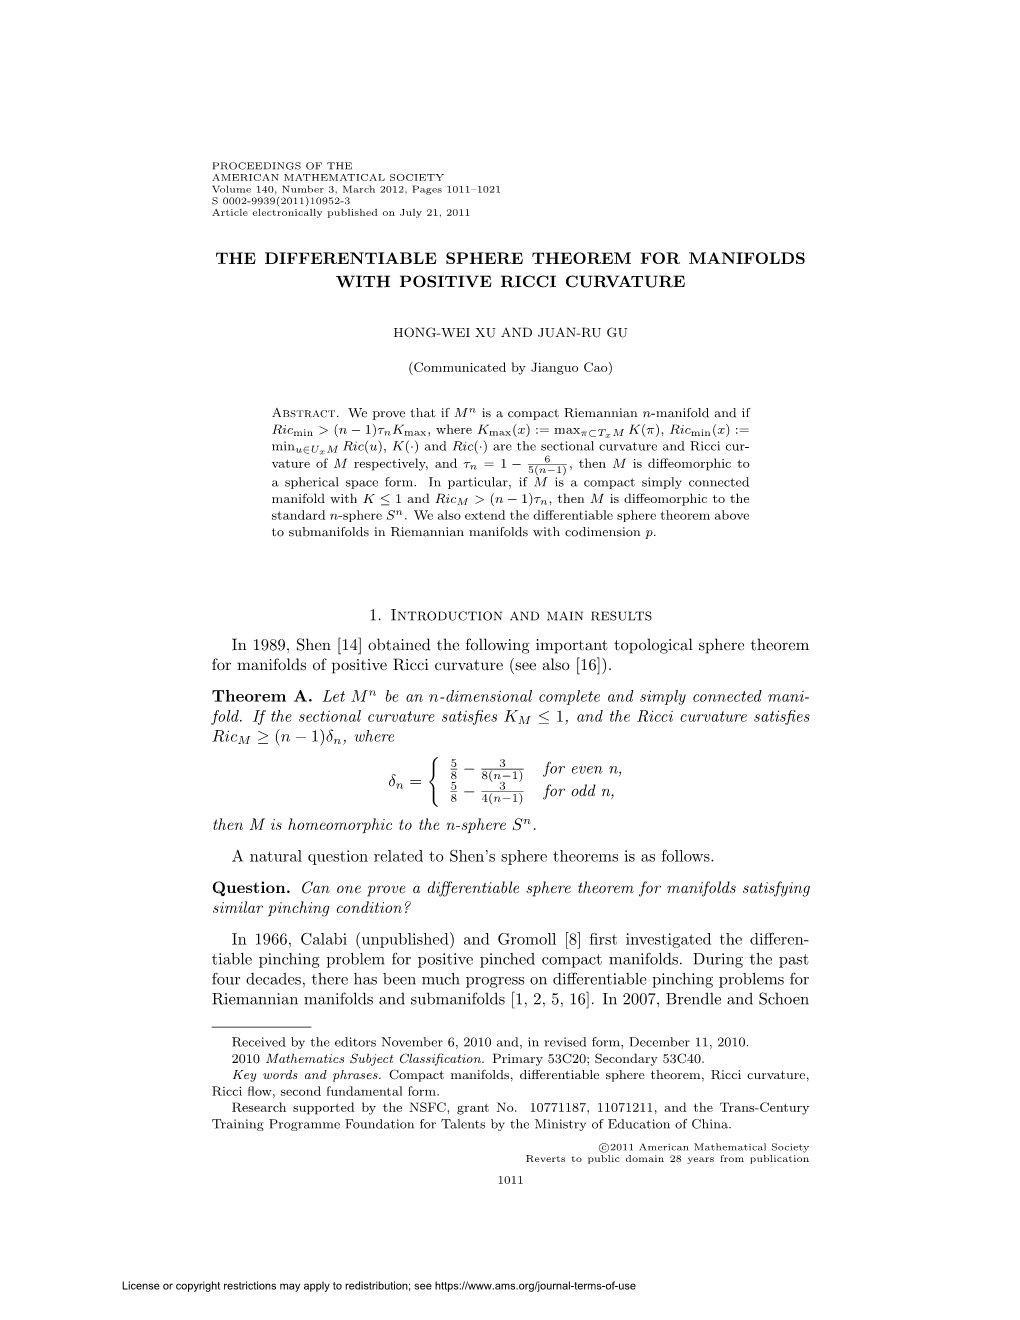 The Differentiable Sphere Theorem for Manifolds with Positive Ricci Curvature